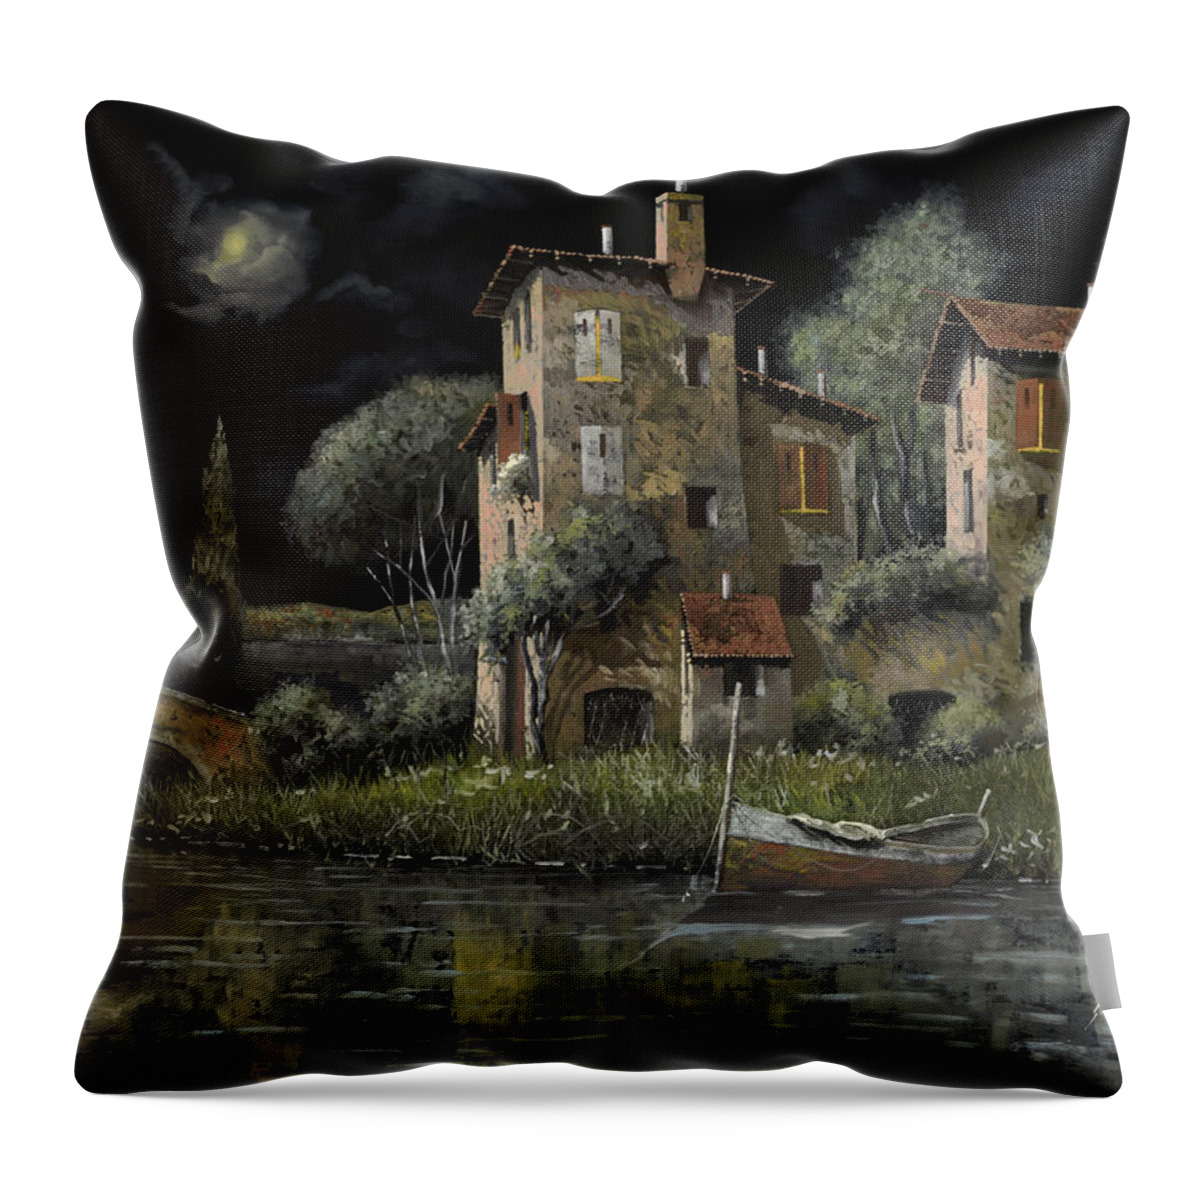 Nightscape Throw Pillow featuring the painting Notte Nera by Guido Borelli